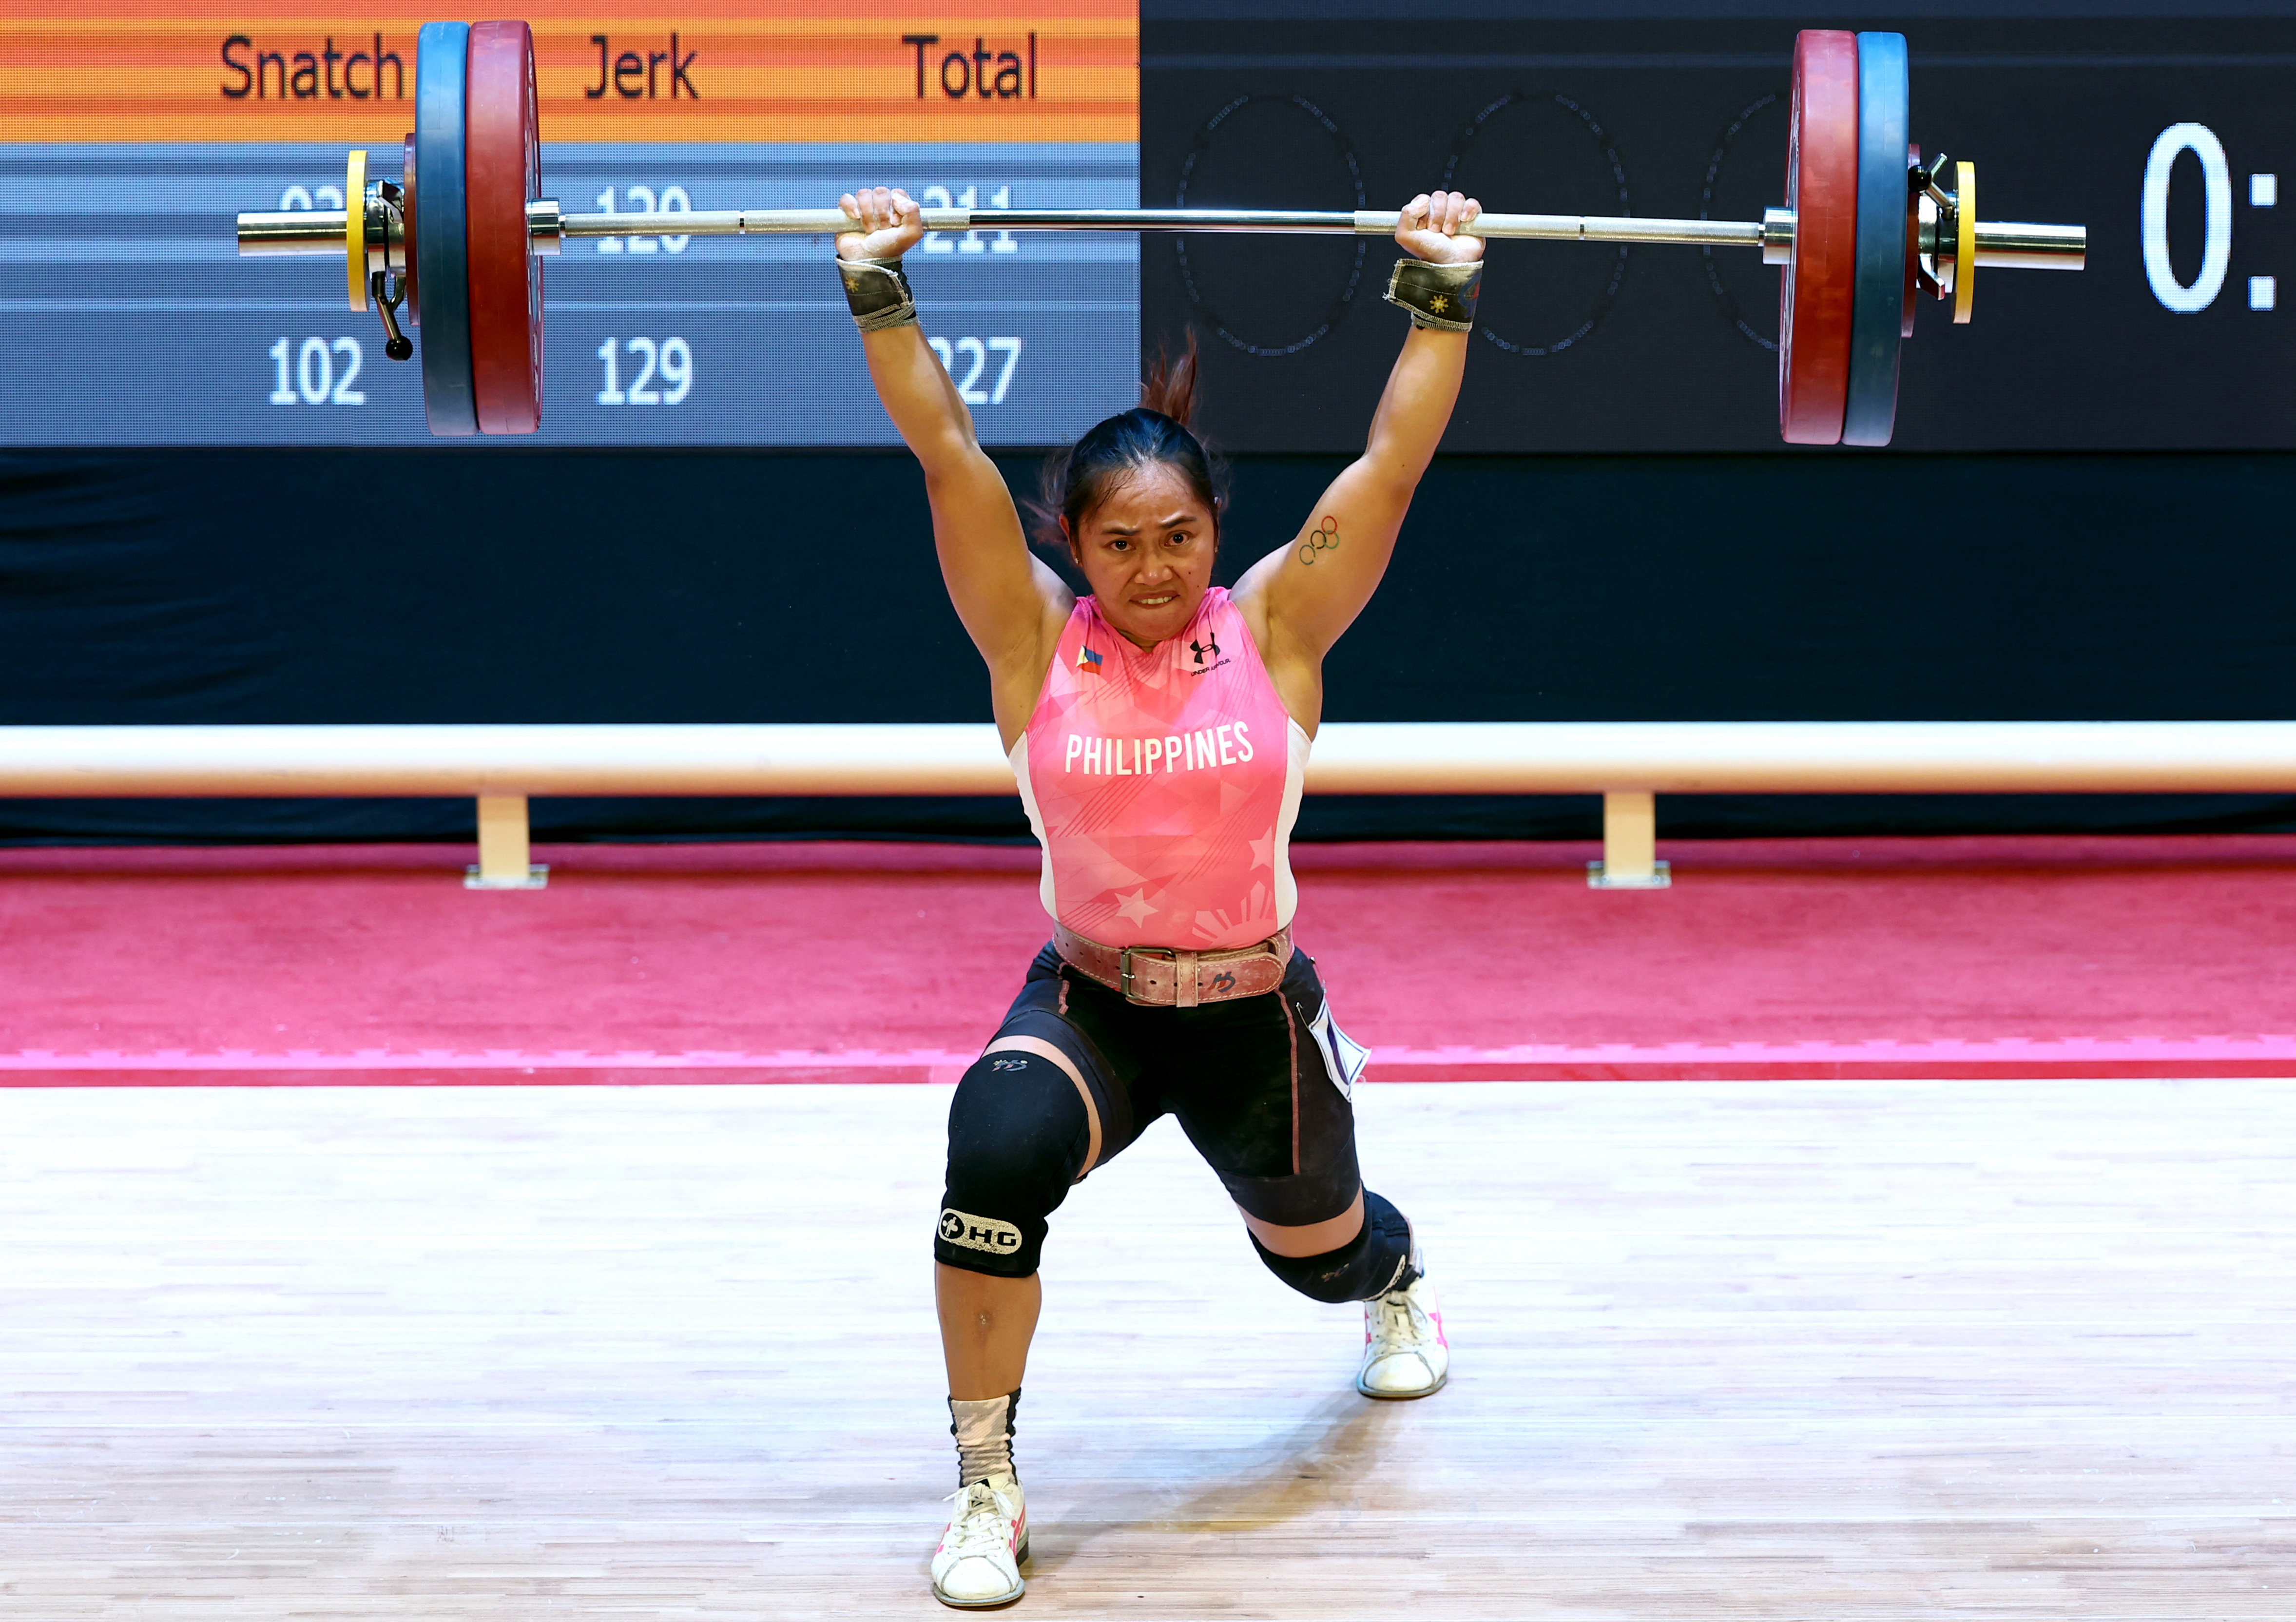 Southeast Asian Games - Weightlifting - Hanoi Sports Training and Competition Center, Hanoi, Vietnam - May 20, 2022 Philippines' Hidilyn Diaz in action during the women's 55kg REUTERS/Chalinee Thirasupa